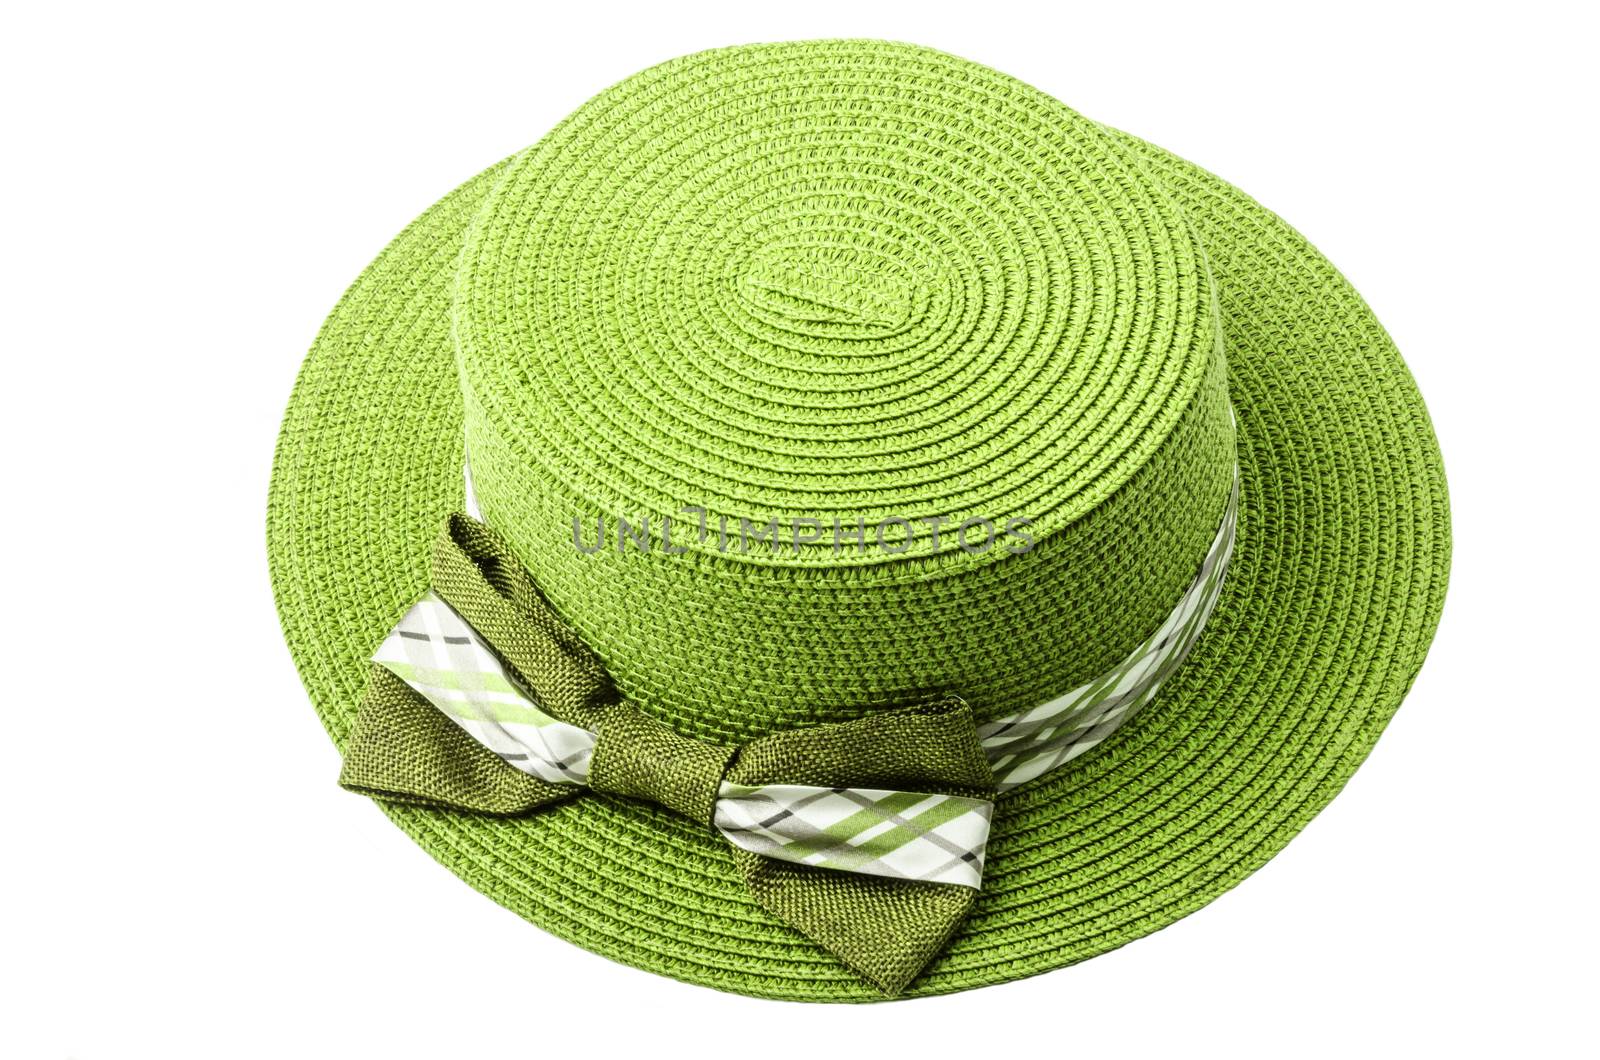 Straw green hat isolated on white background.